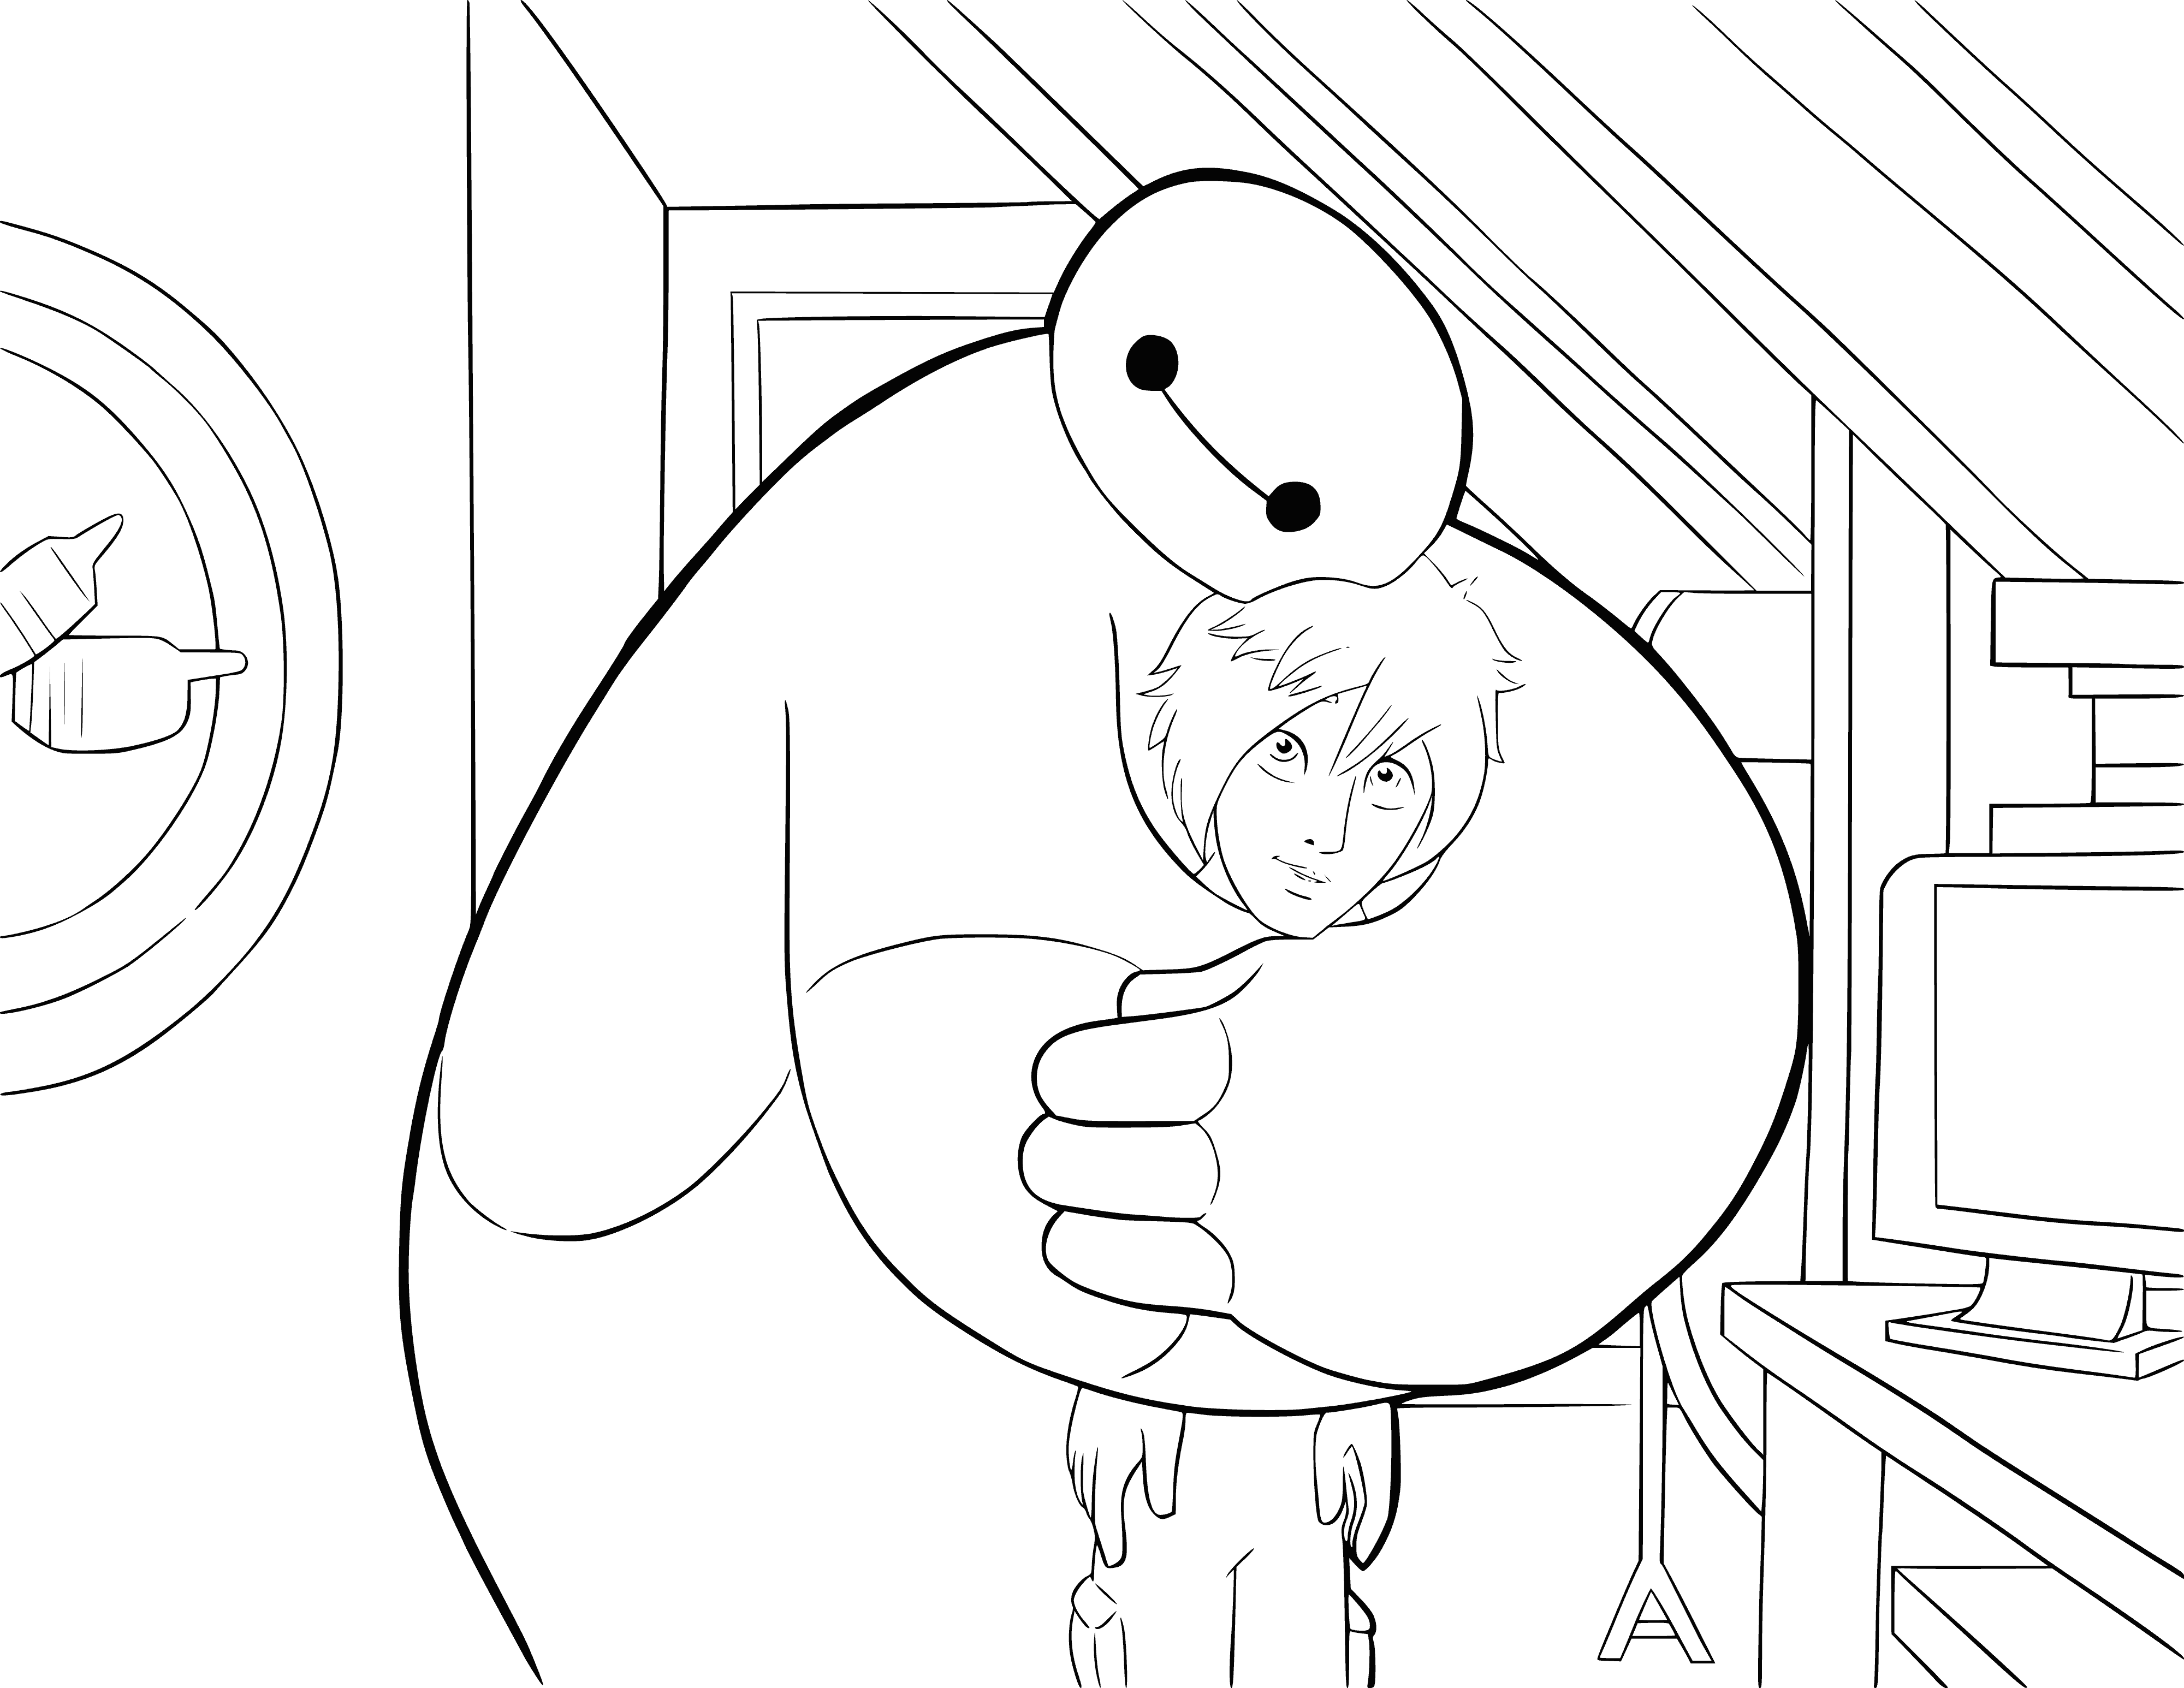 Baymax friend of Hiro coloring page